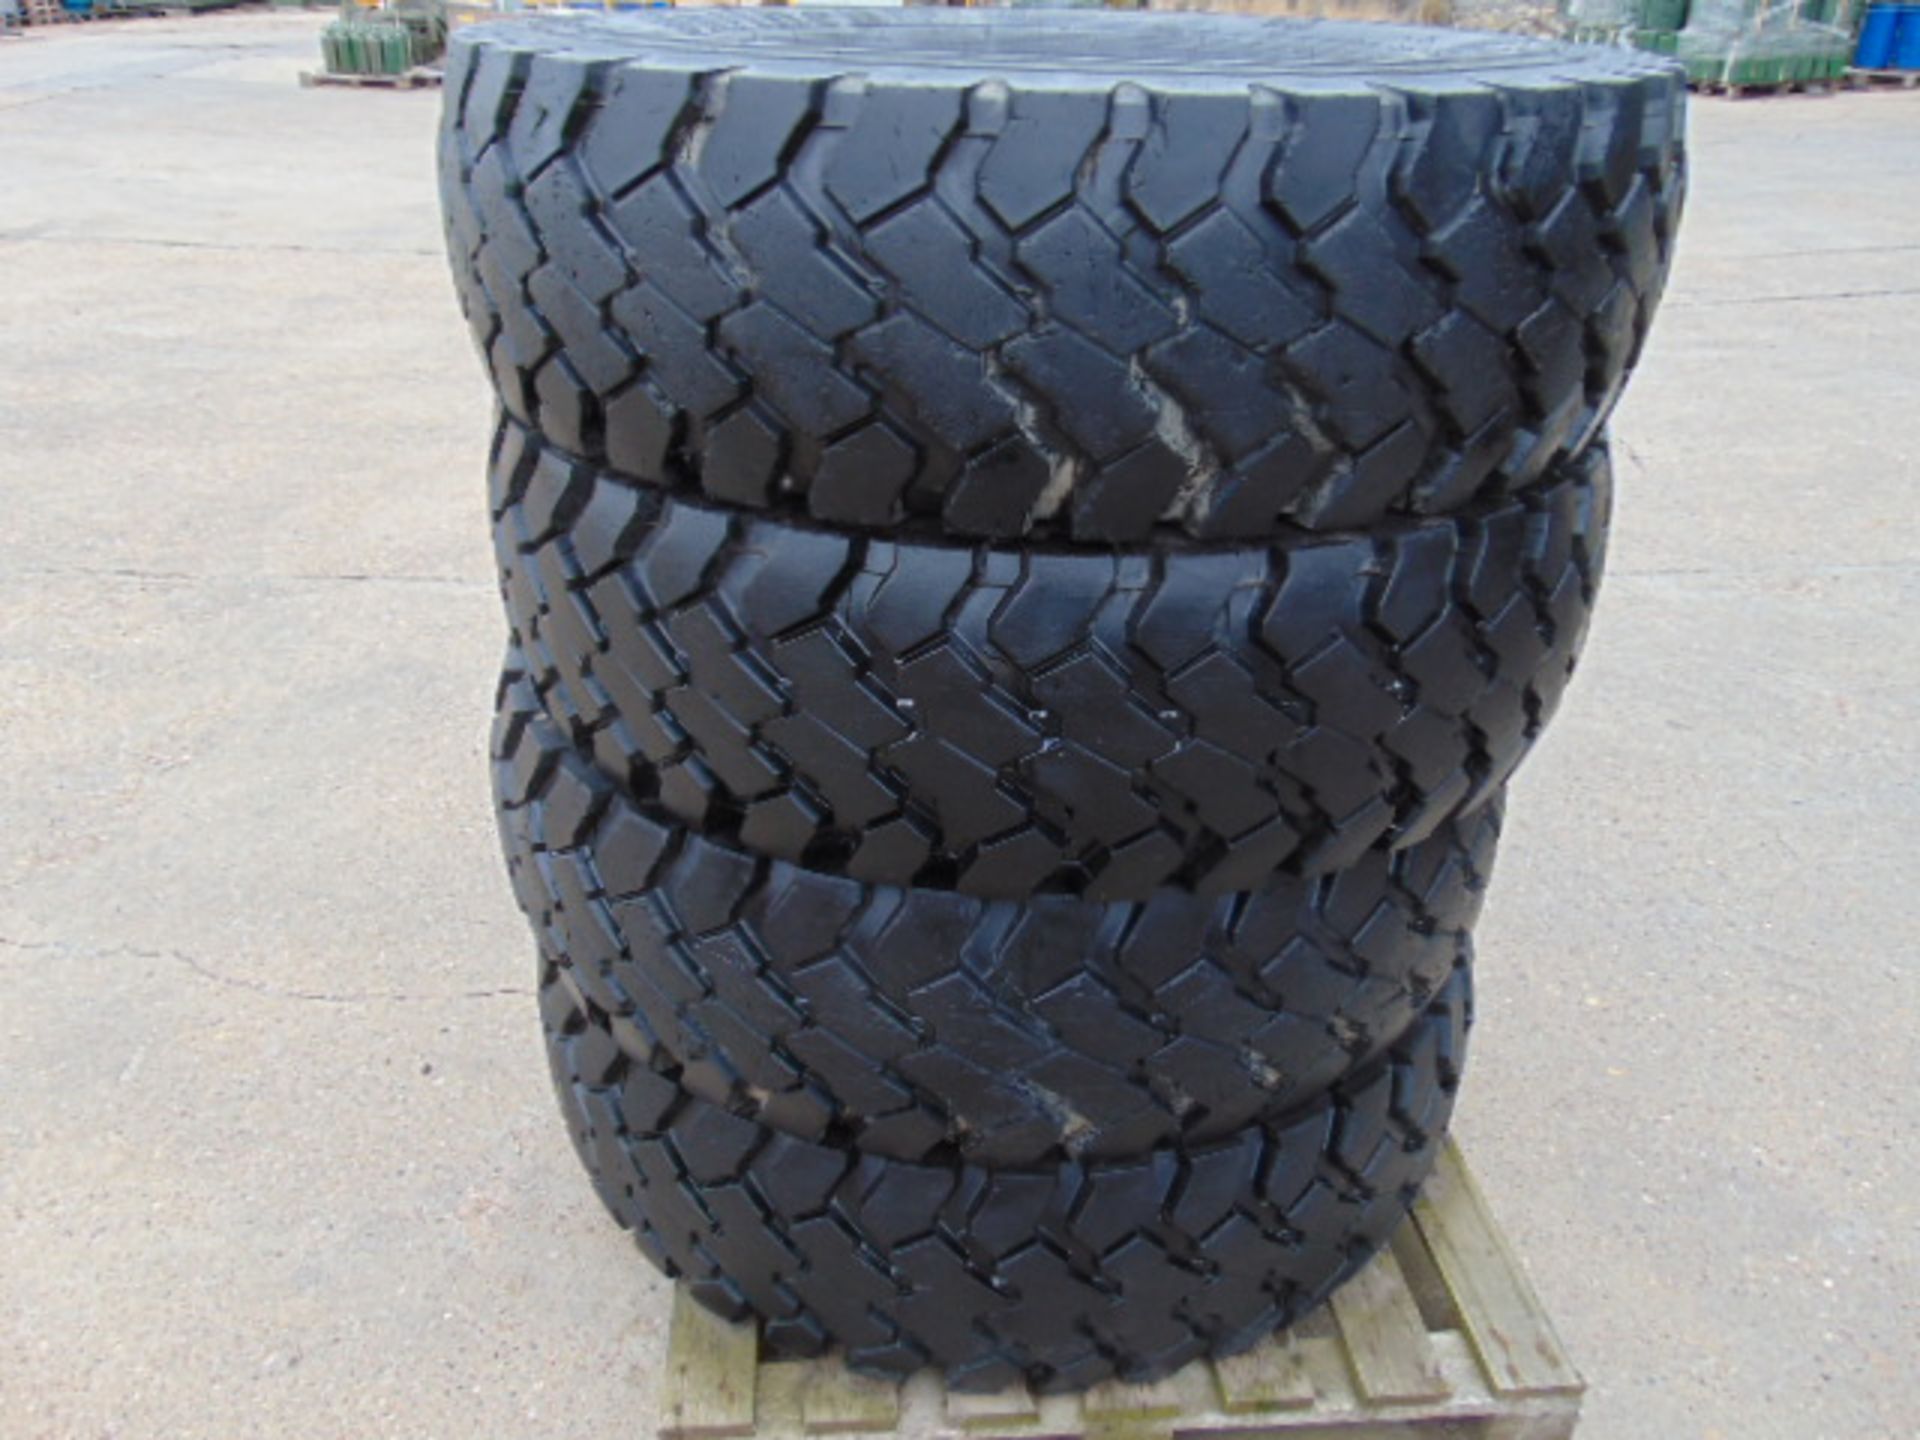 4 x Continental 14.00 R20 Tyres